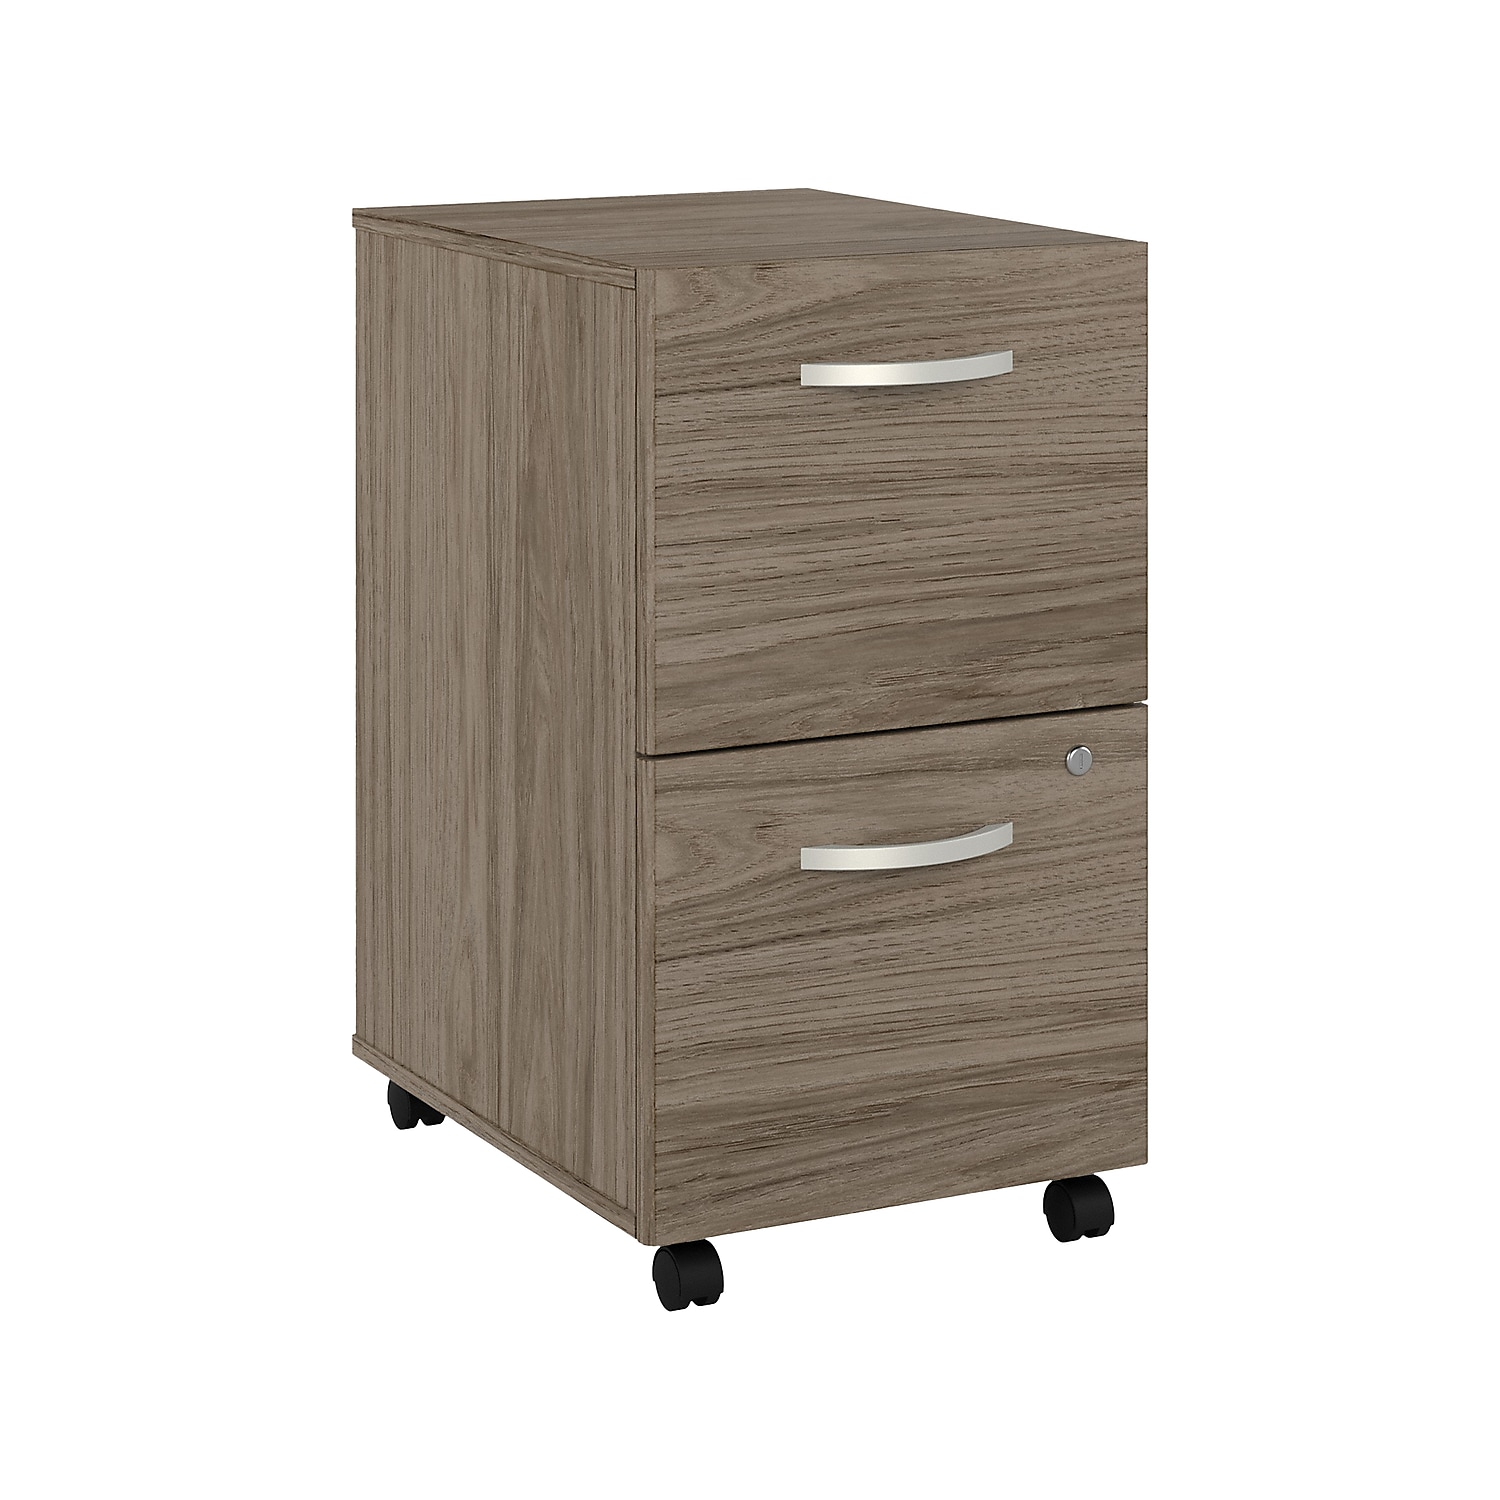 Hybrid 2 Drawer Mobile File Cabinet in Modern Hickory - Engineered Wood - image 1 of 6